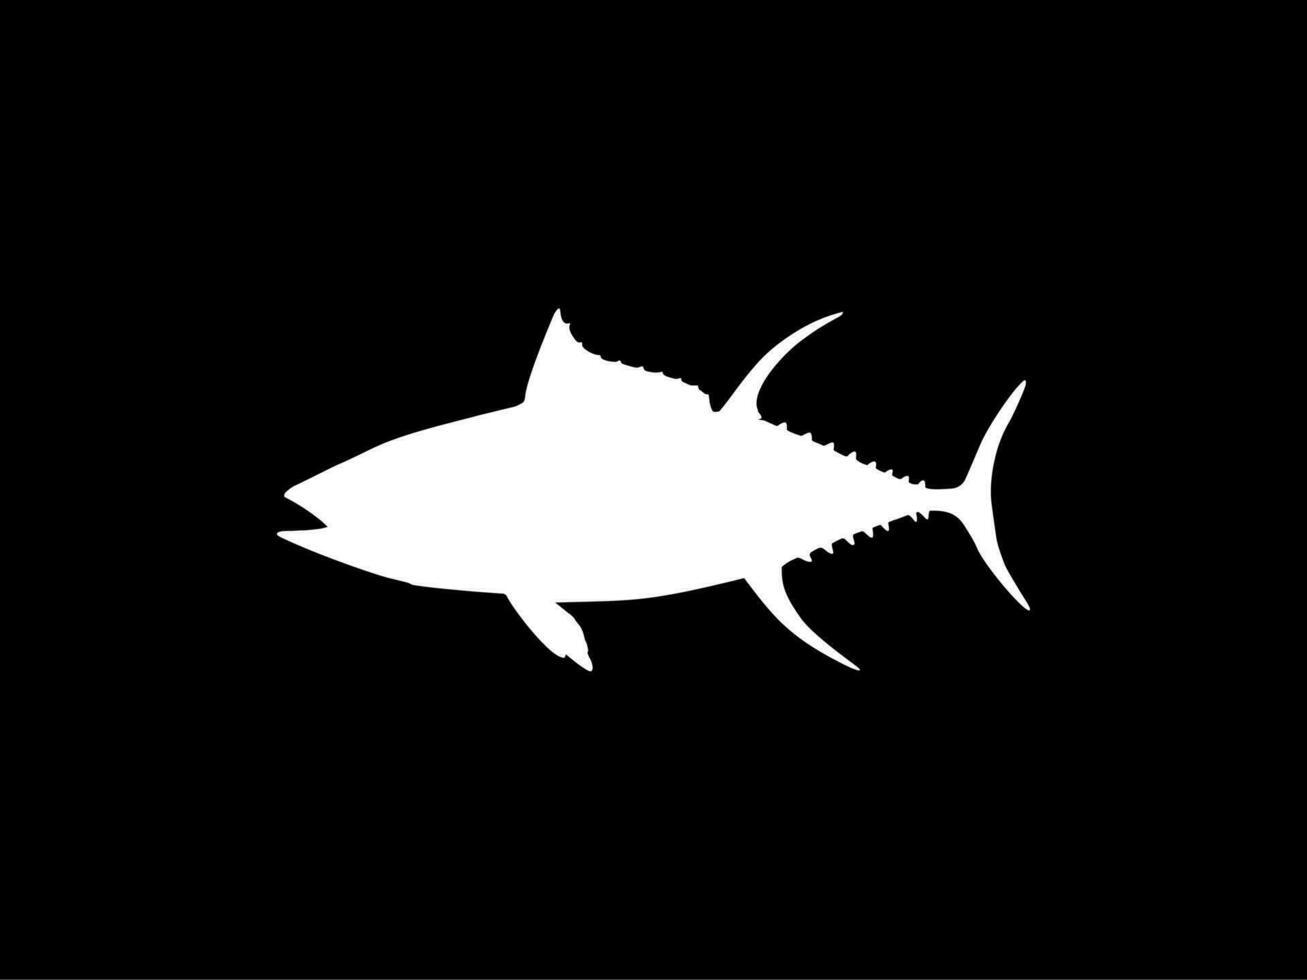 Flat Style Silhouette of the Tuna Fish, can use for Logo Type, Art Illustration, Pictogram, Website or Graphic Design Element. Vector Illustration